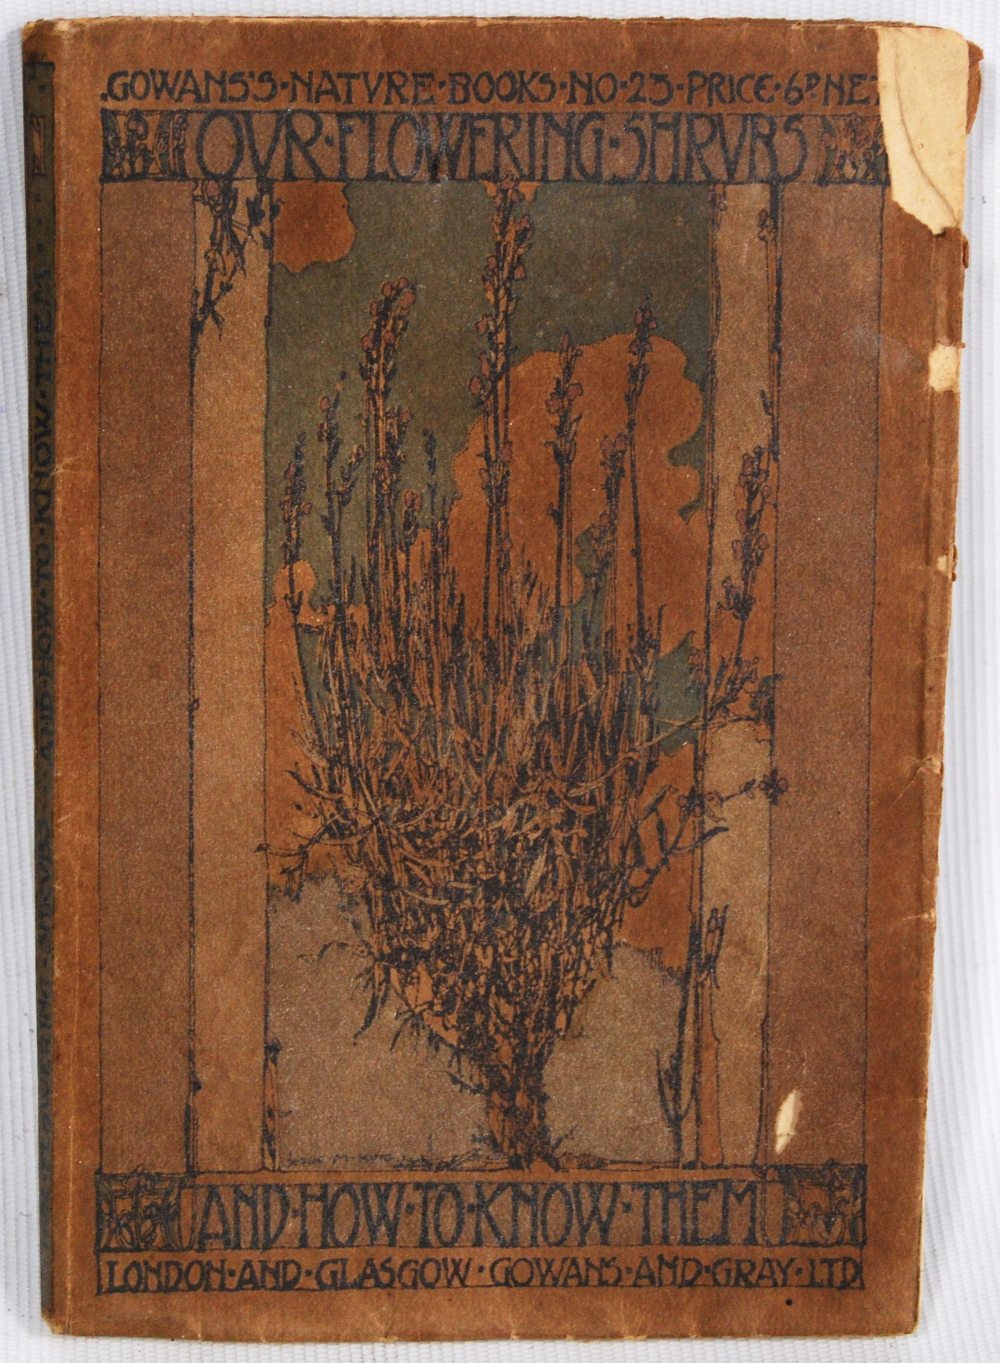 Robert Louis Stevenson, Memories, published by Foulis, cover illustrated by Jessie Marion King, - Image 6 of 11